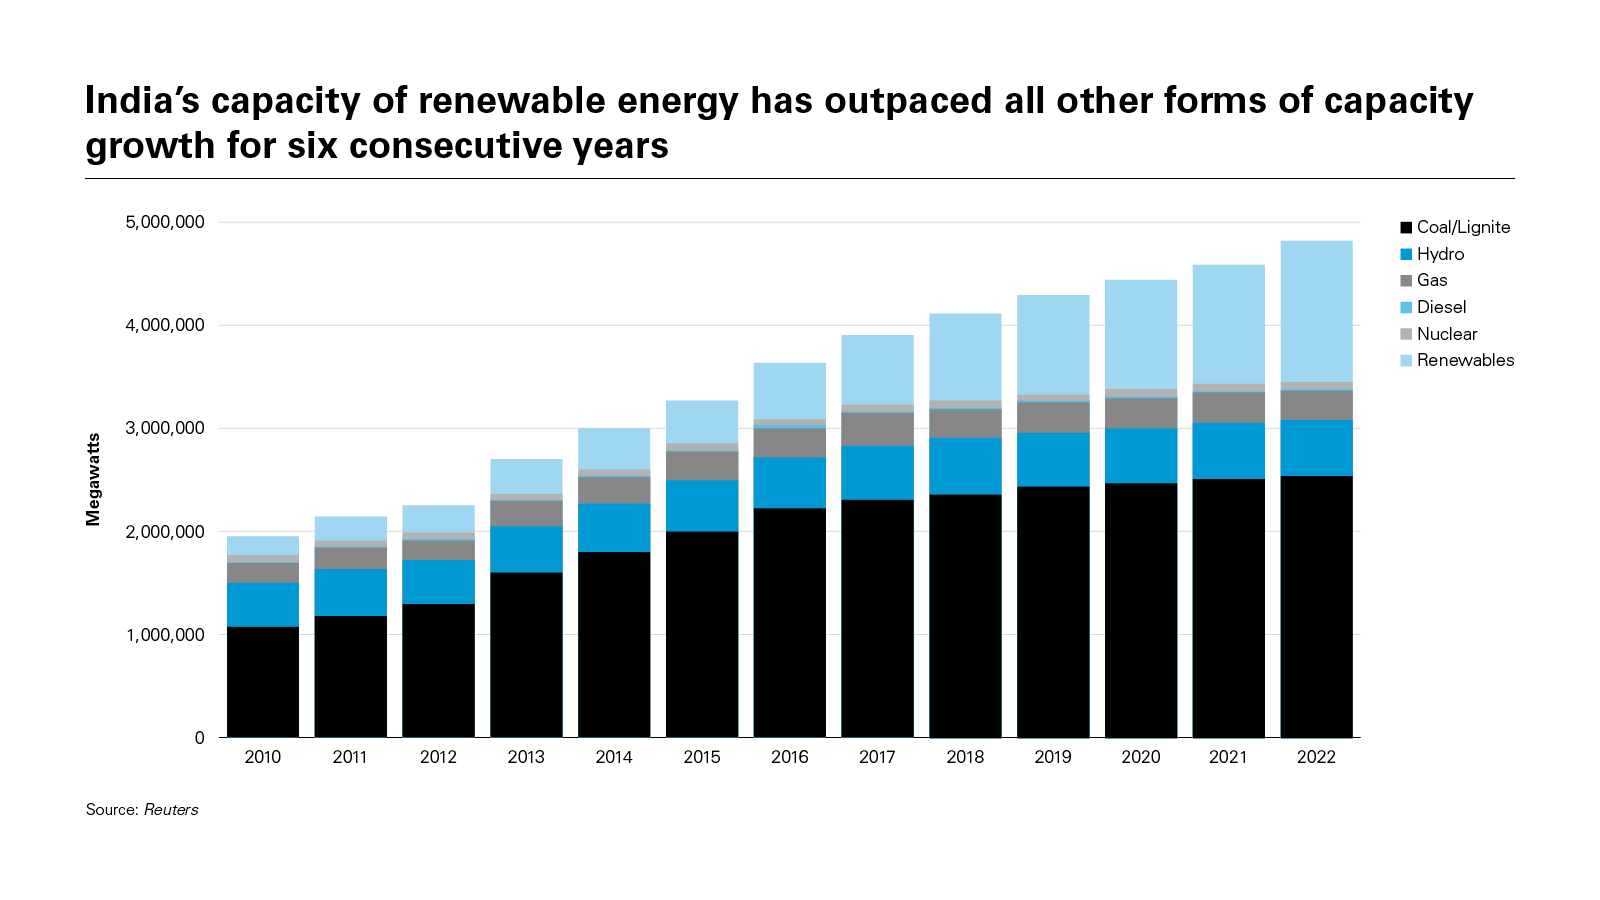 India’s capacity of renewable energy has outpaced all other forms of capacity growth for six consecutive years